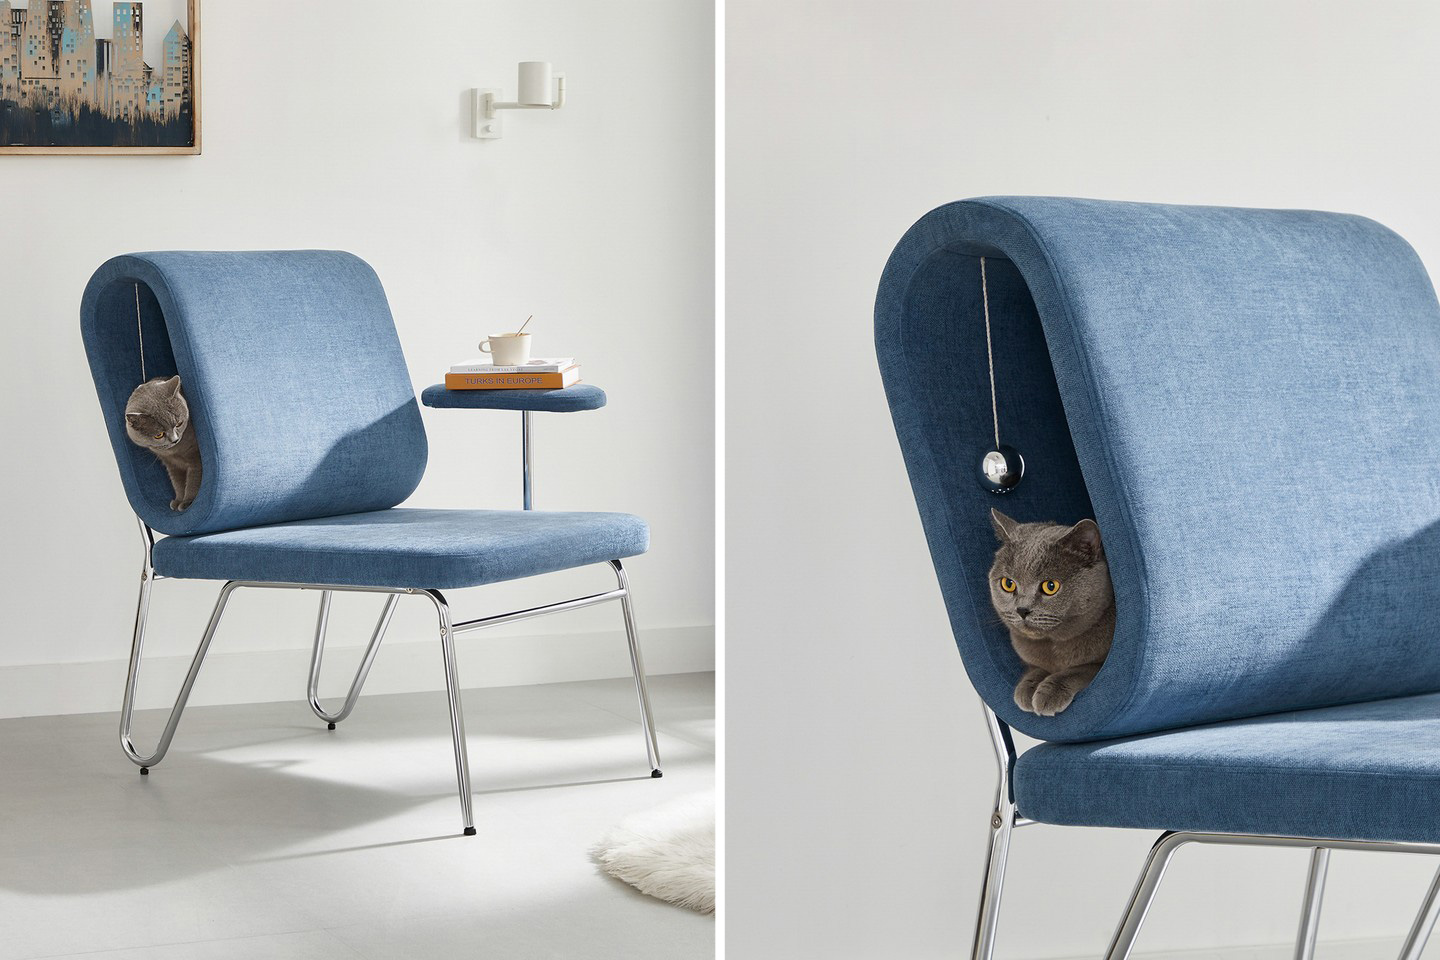 Top chair designs that are the culmination of ergonomics, style, and comfort - Yanko Design